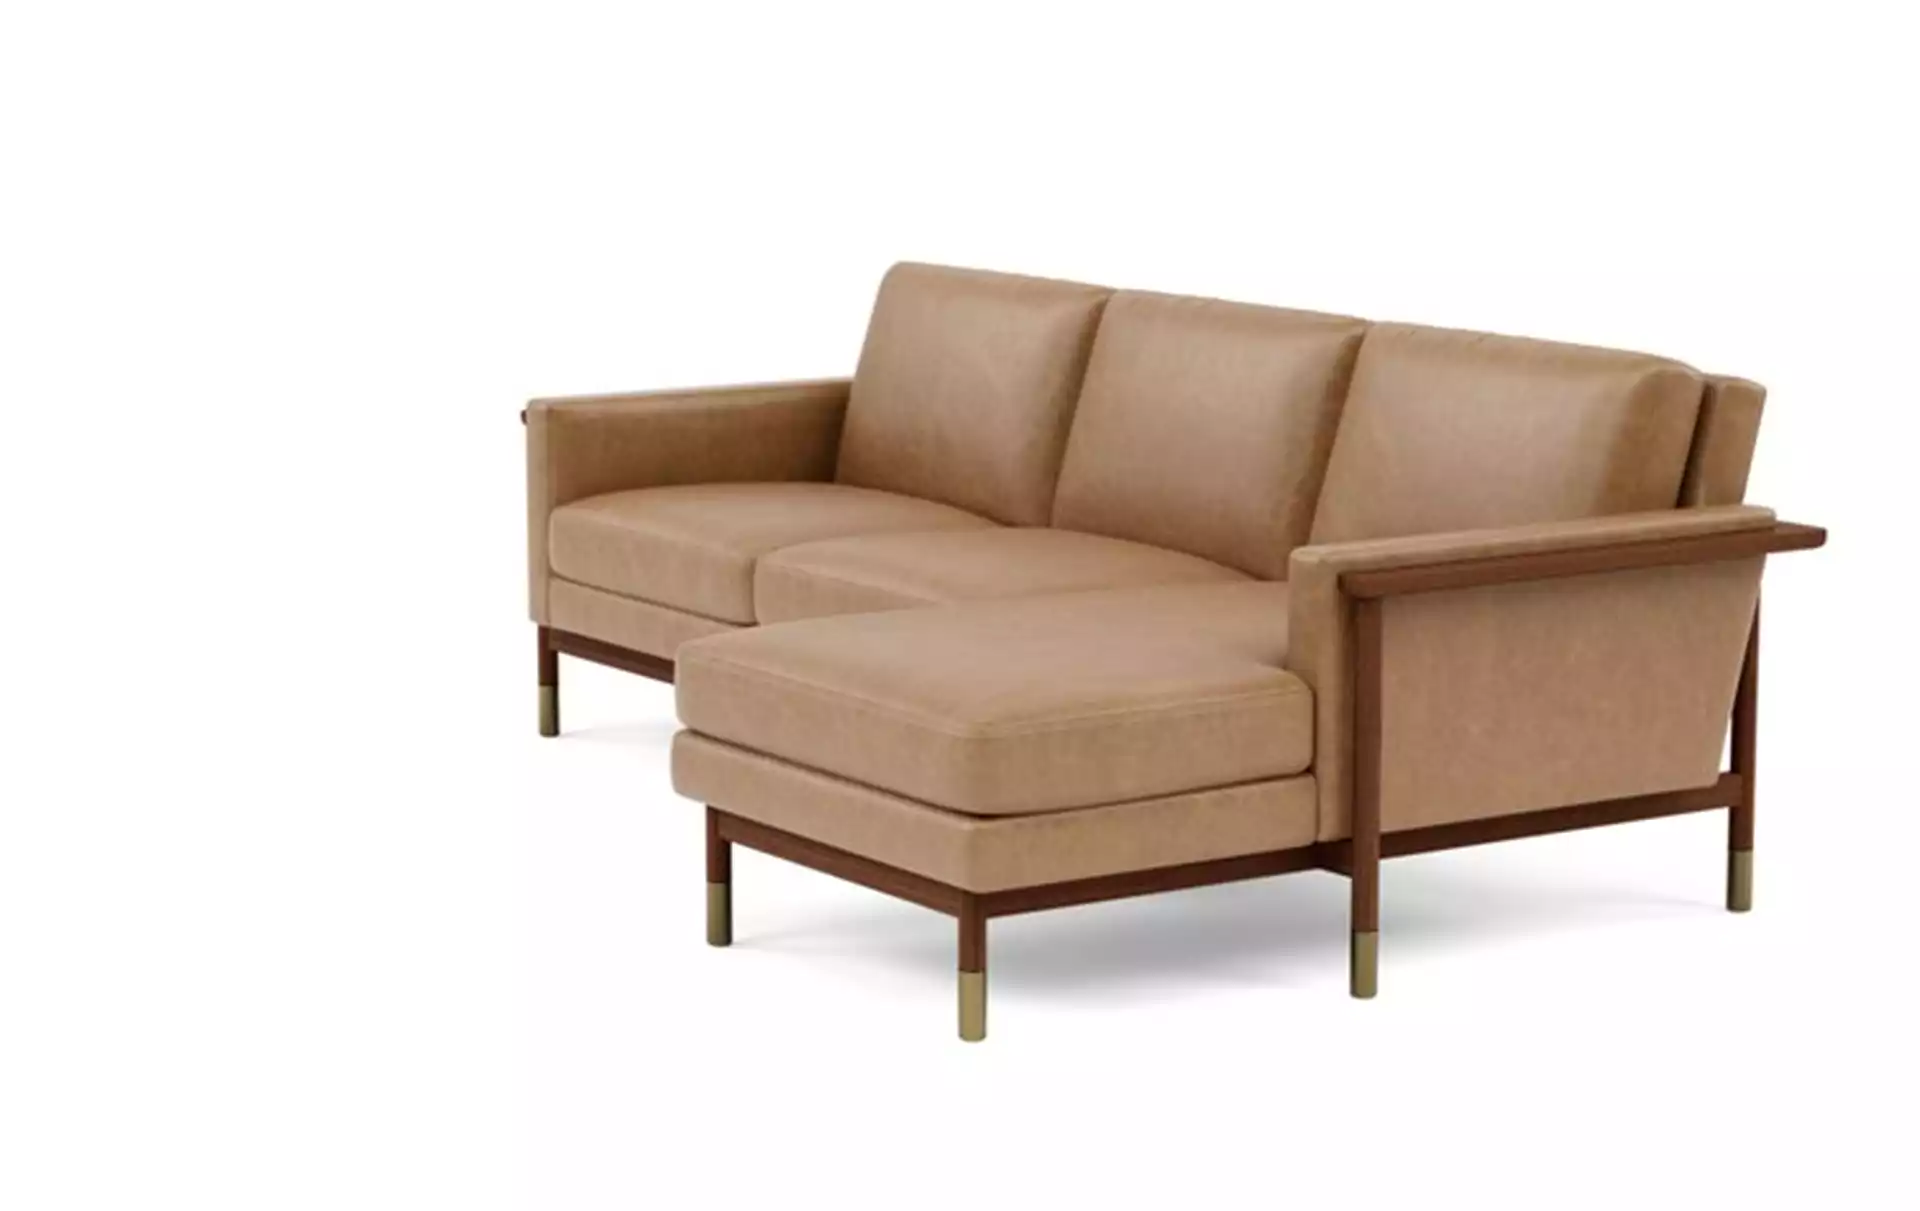 Jason Wu Leather Right Sectional with Brown Palomino Leather, extended chaise, and Oiled Walnut with Brass Cap legs